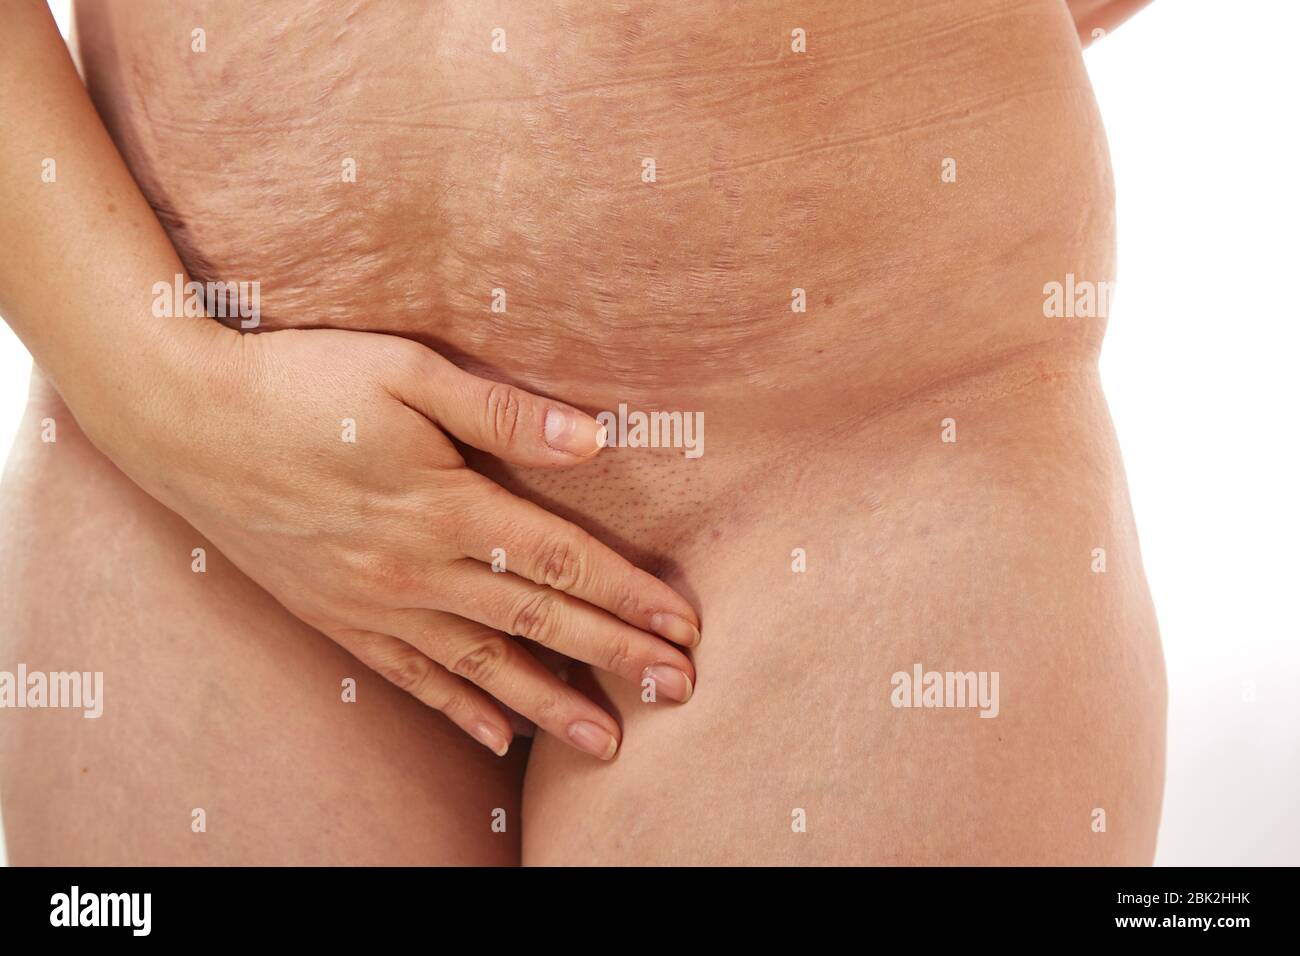 belly of a 40 year old woman with postpartum stretch marks close up Stock Photo